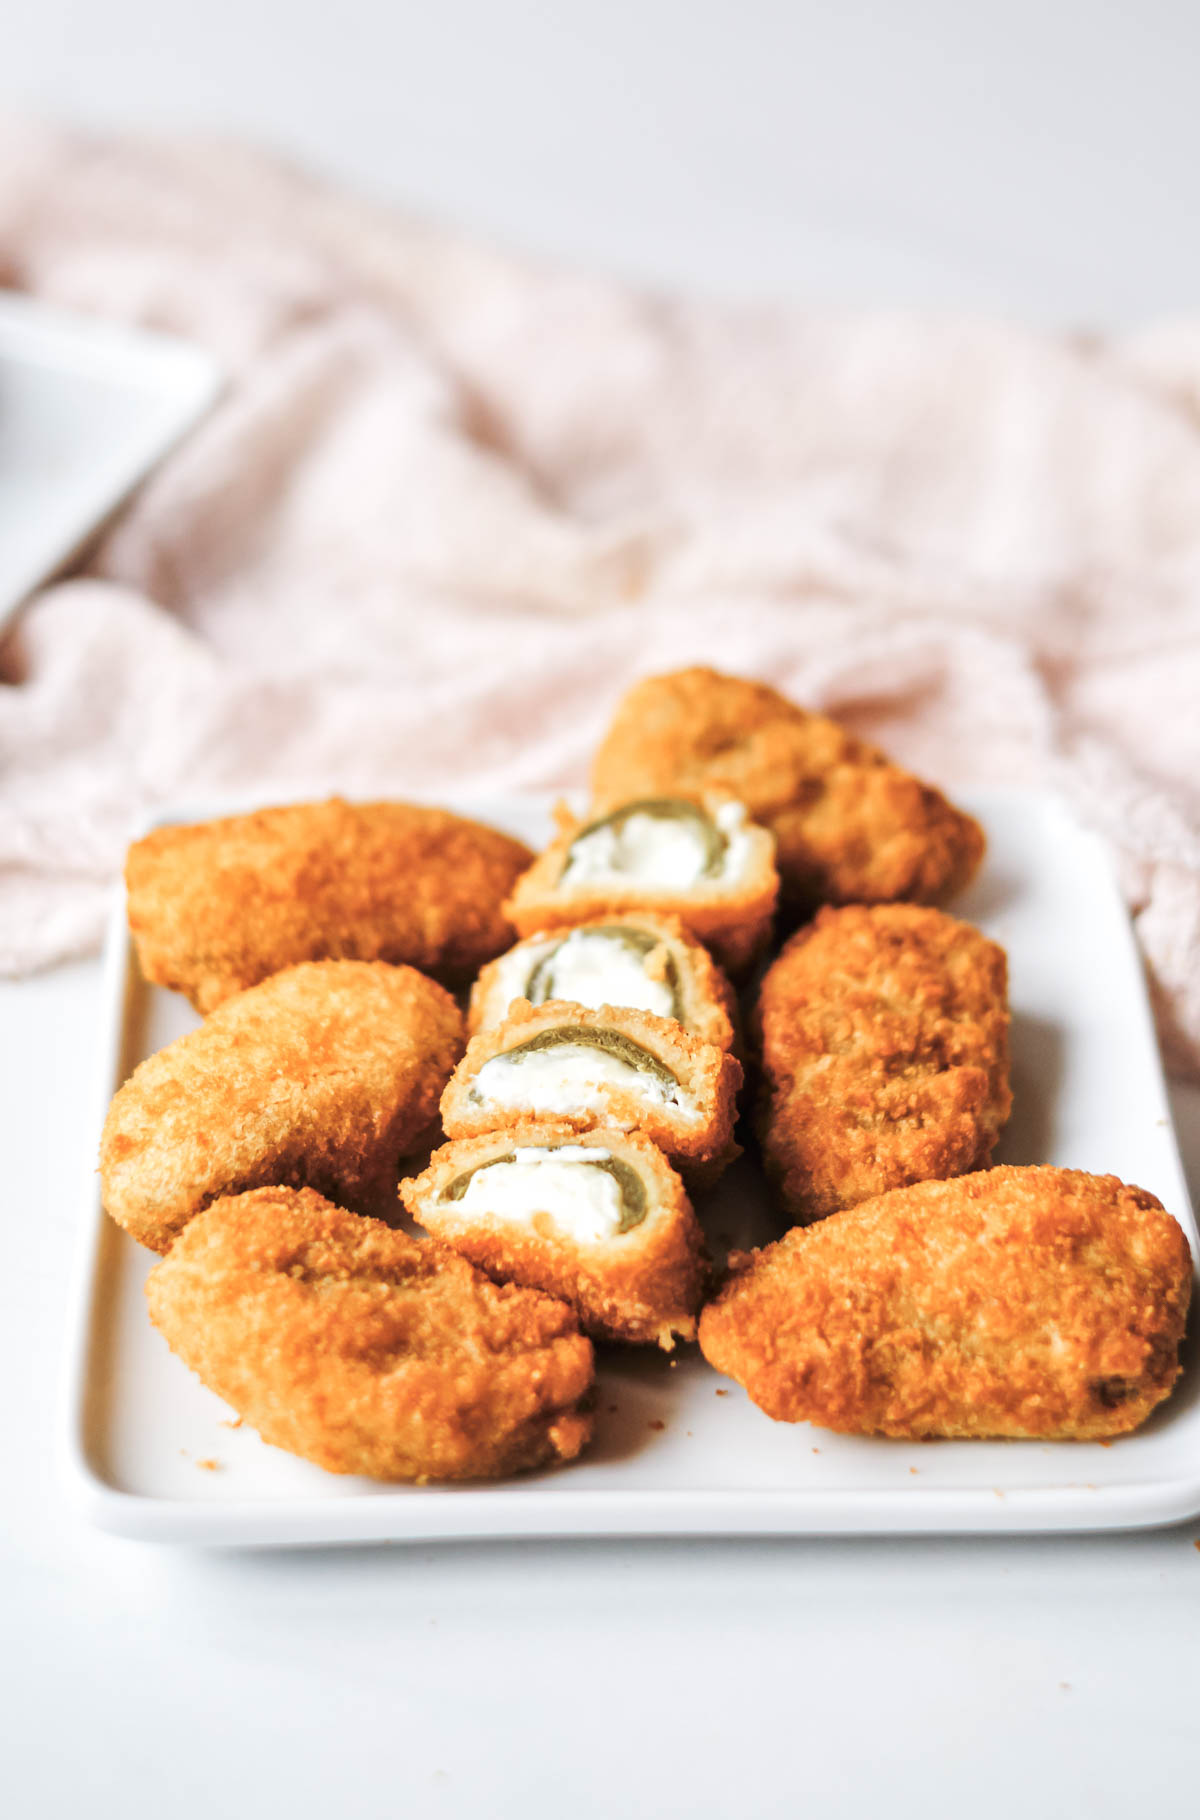 the cooked air fryer jalapeno poppers served on a white plate